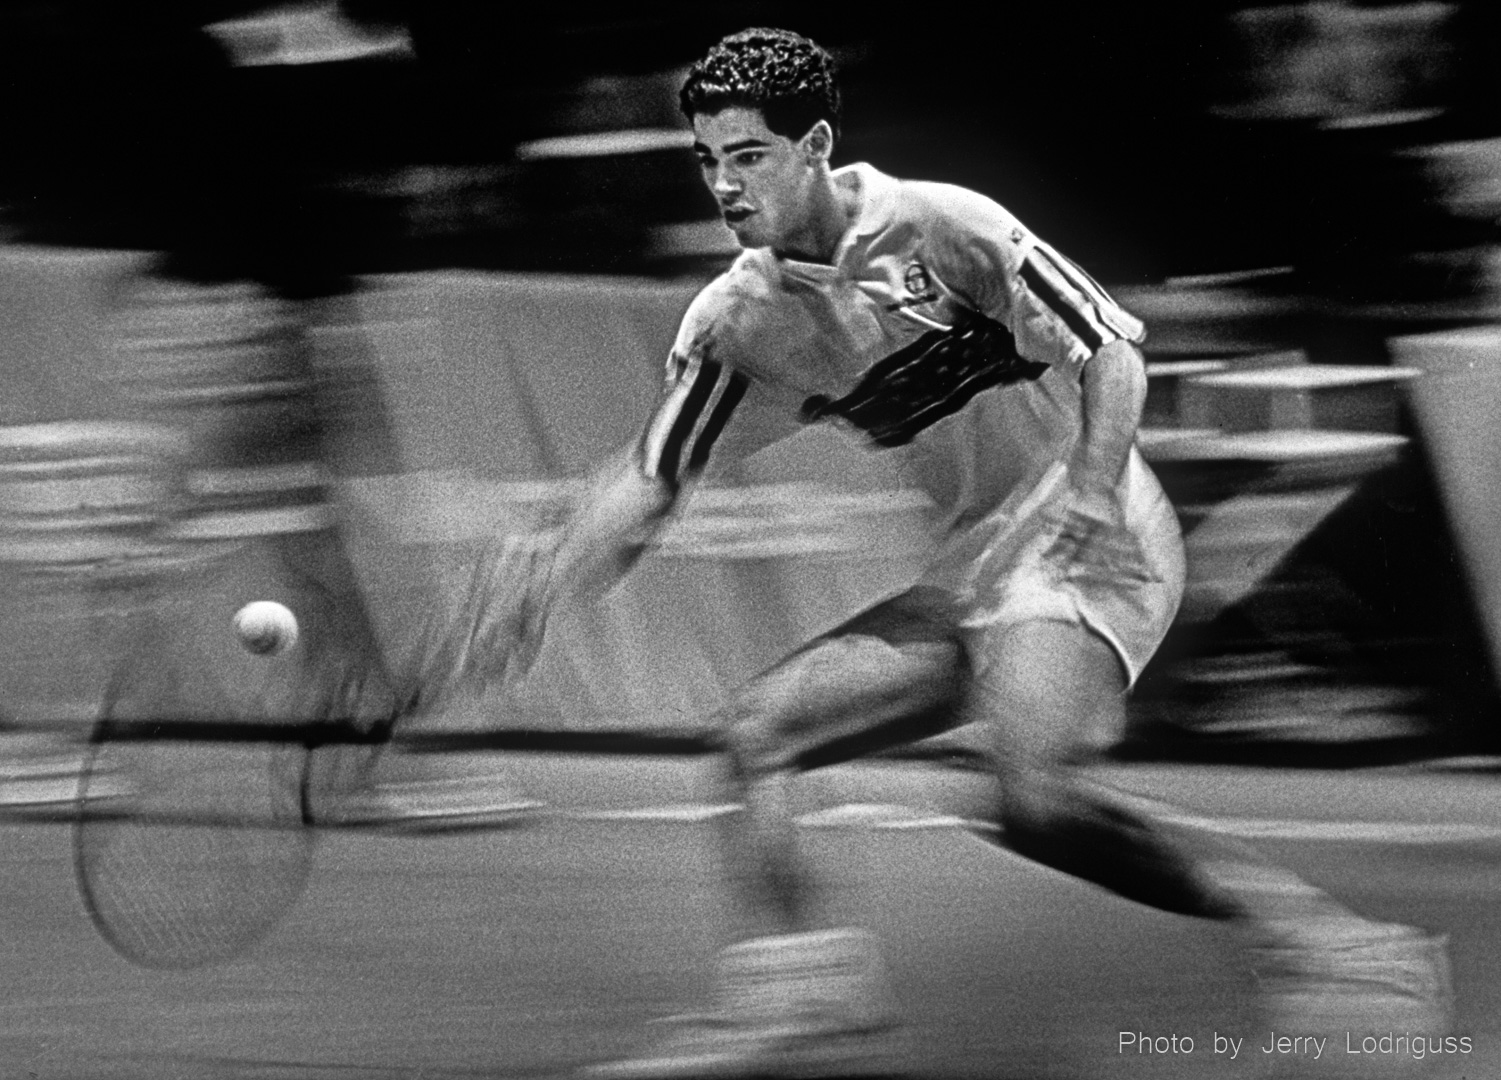 The ball seems to stand still as everything else around it is in motion during this slow shutter speed exposure of Pete Sampras winning the finals of the US Pro Indoor Tennis Championship in Philadelphia in 1992.